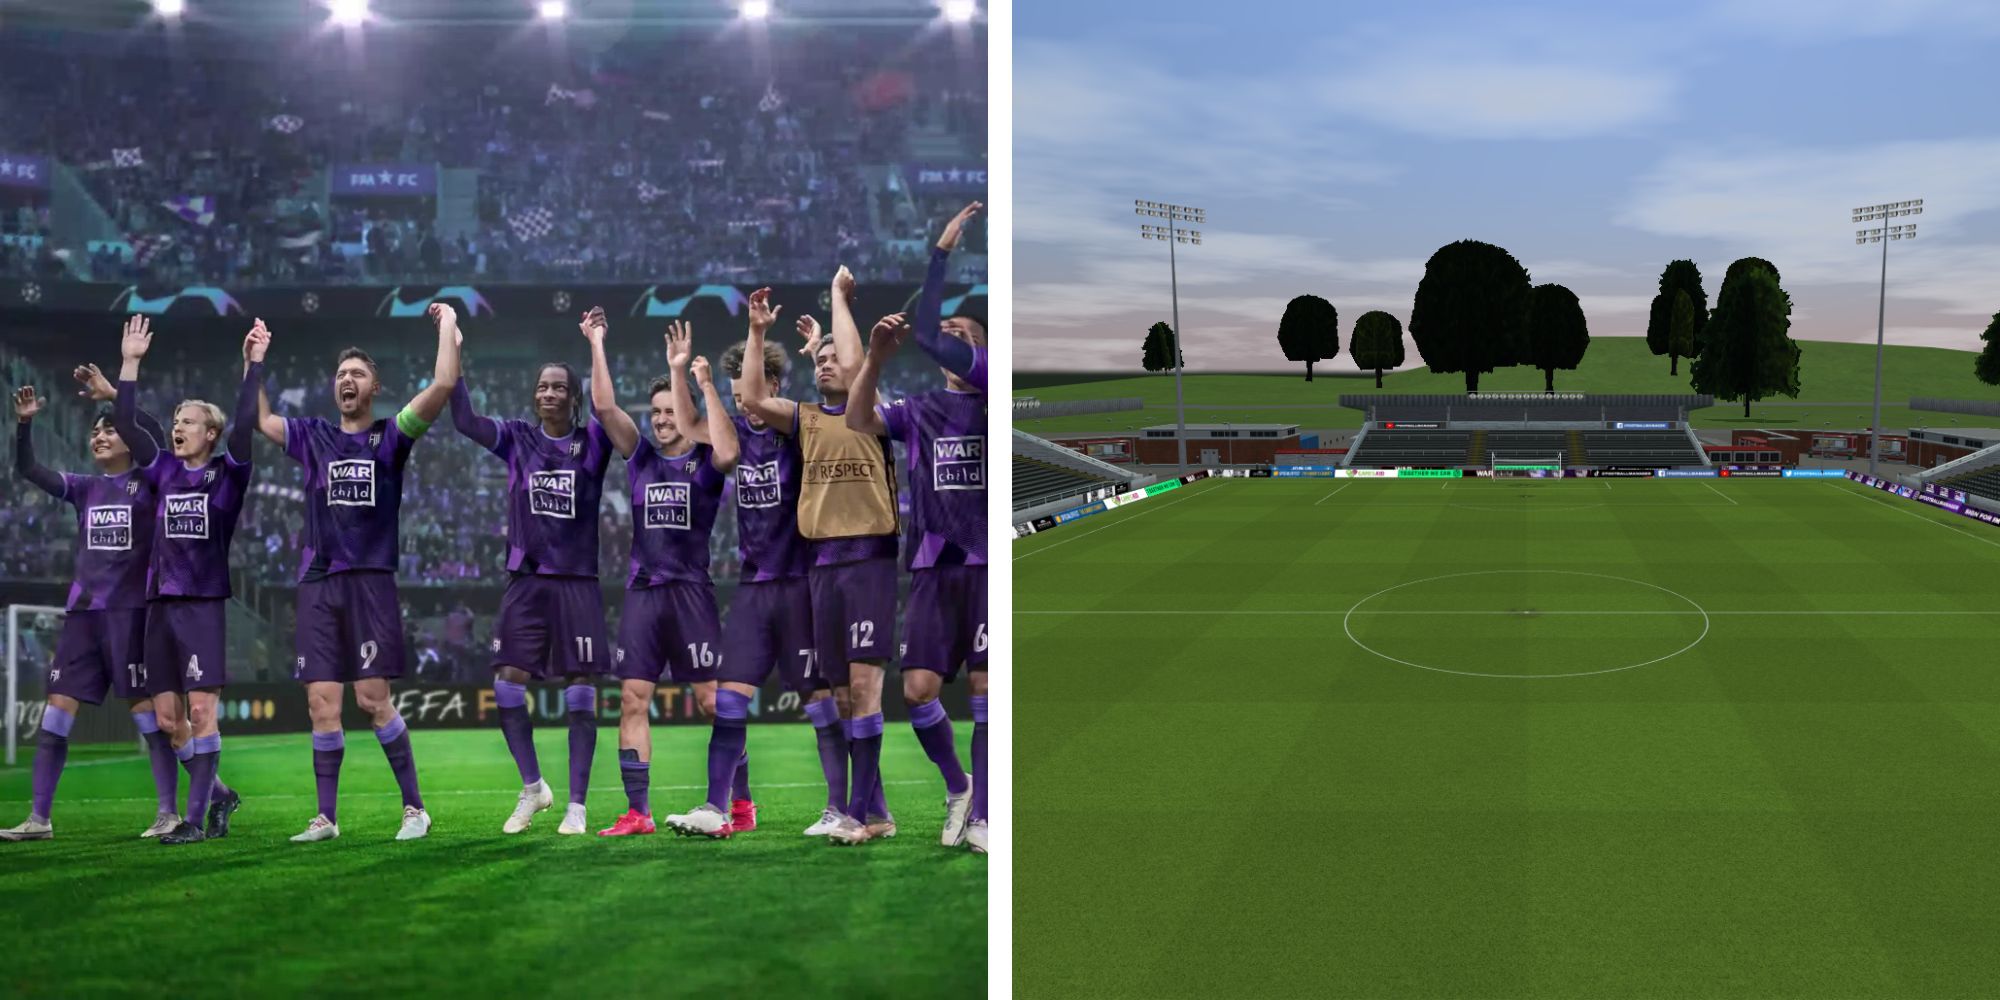 The disc version of Football Manager 2023 has no disc